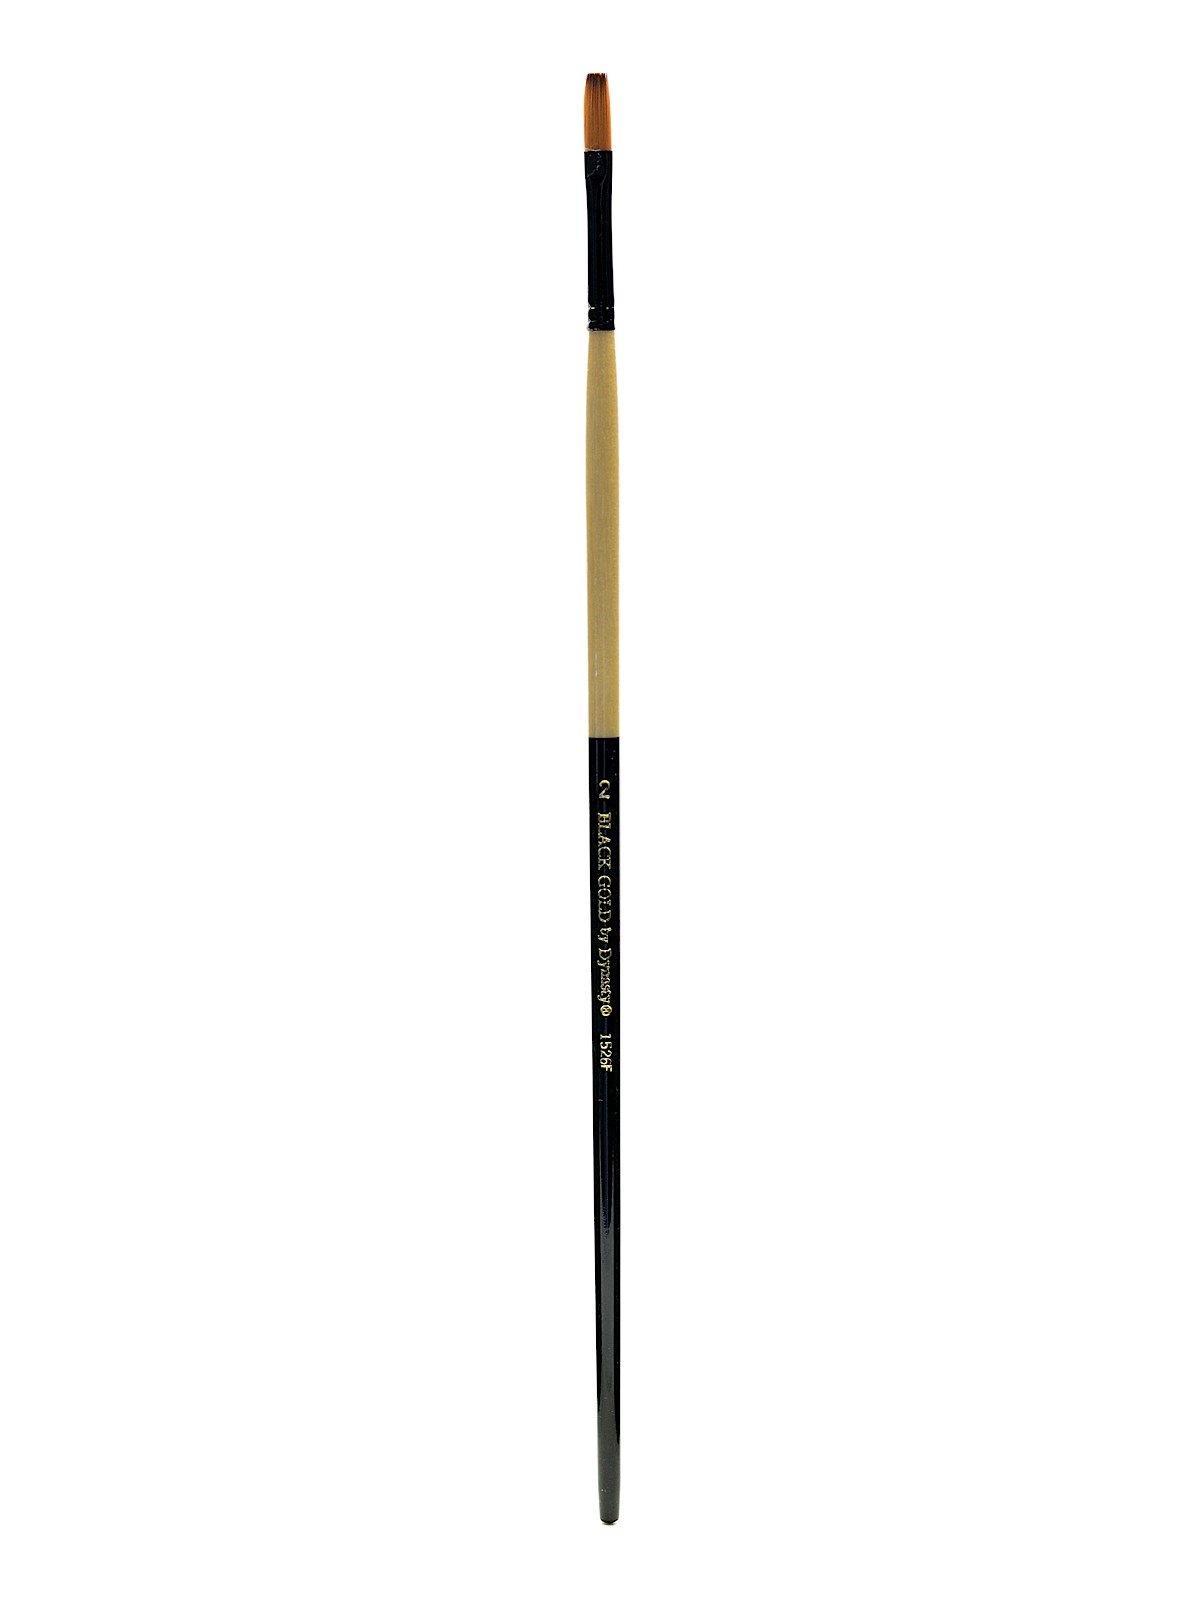 Black Gold Series Long Handled Synthetic Brushes 2 Flat 1526F